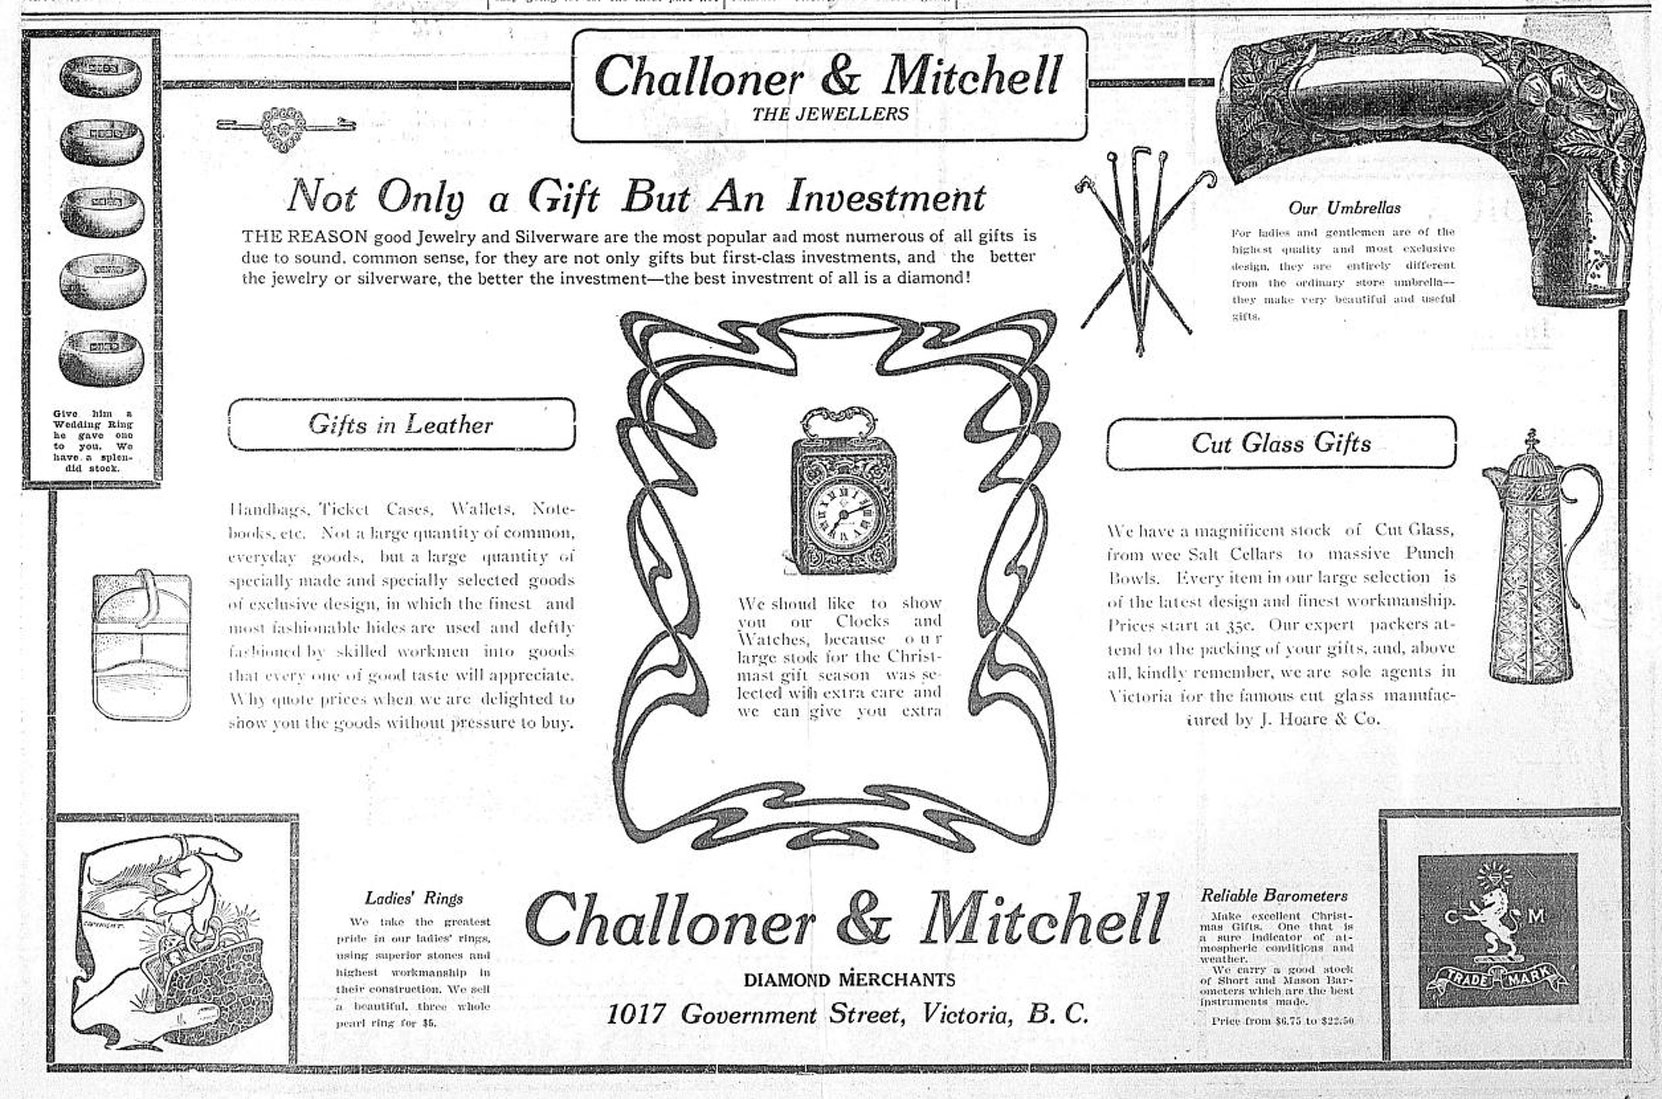 December 1909 advertisement from Challoner & Mitchell, 1017 Government Street.